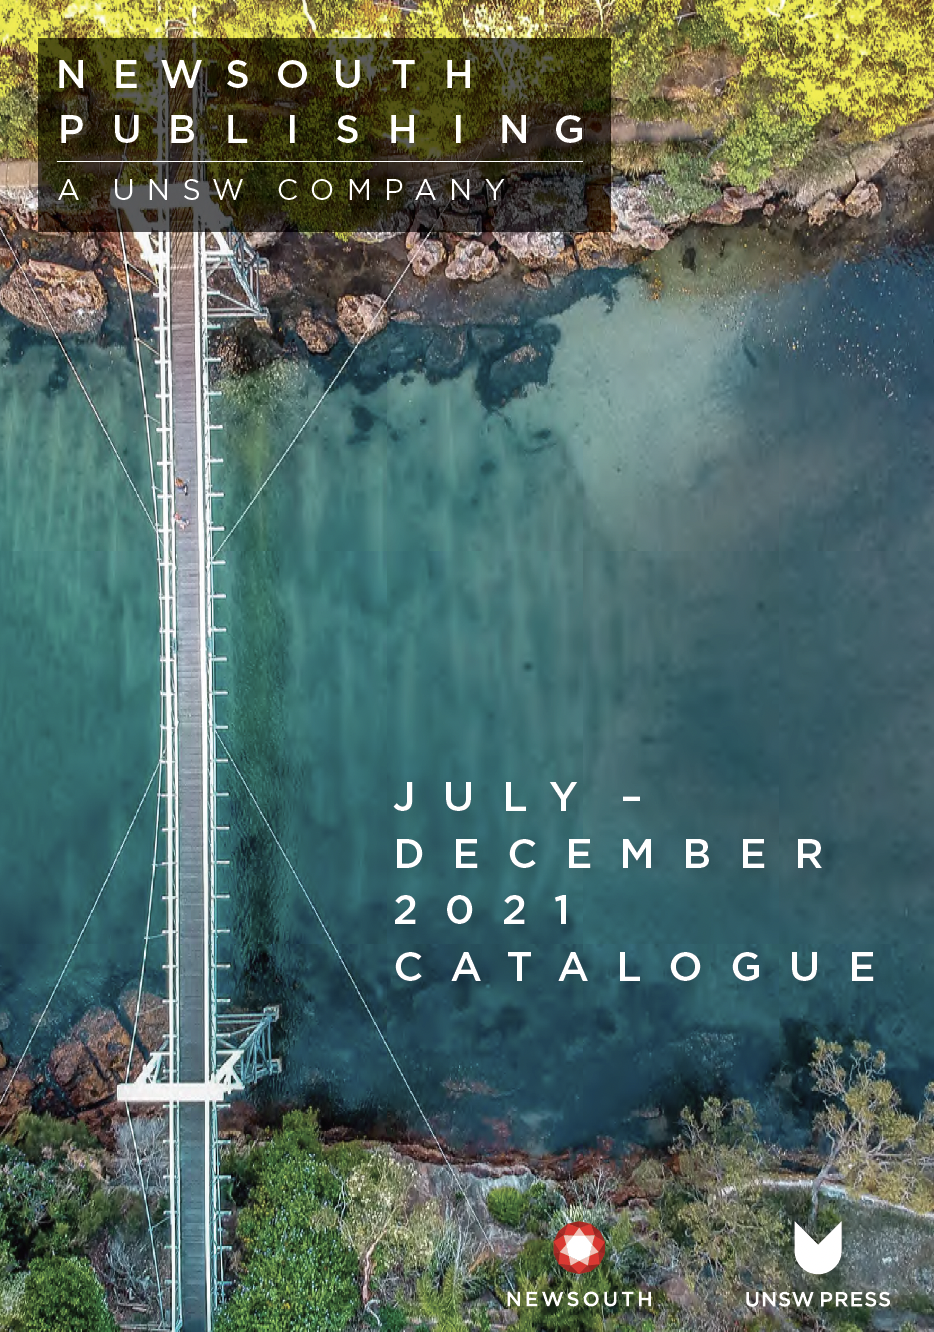 July to December 2021 Catalogue